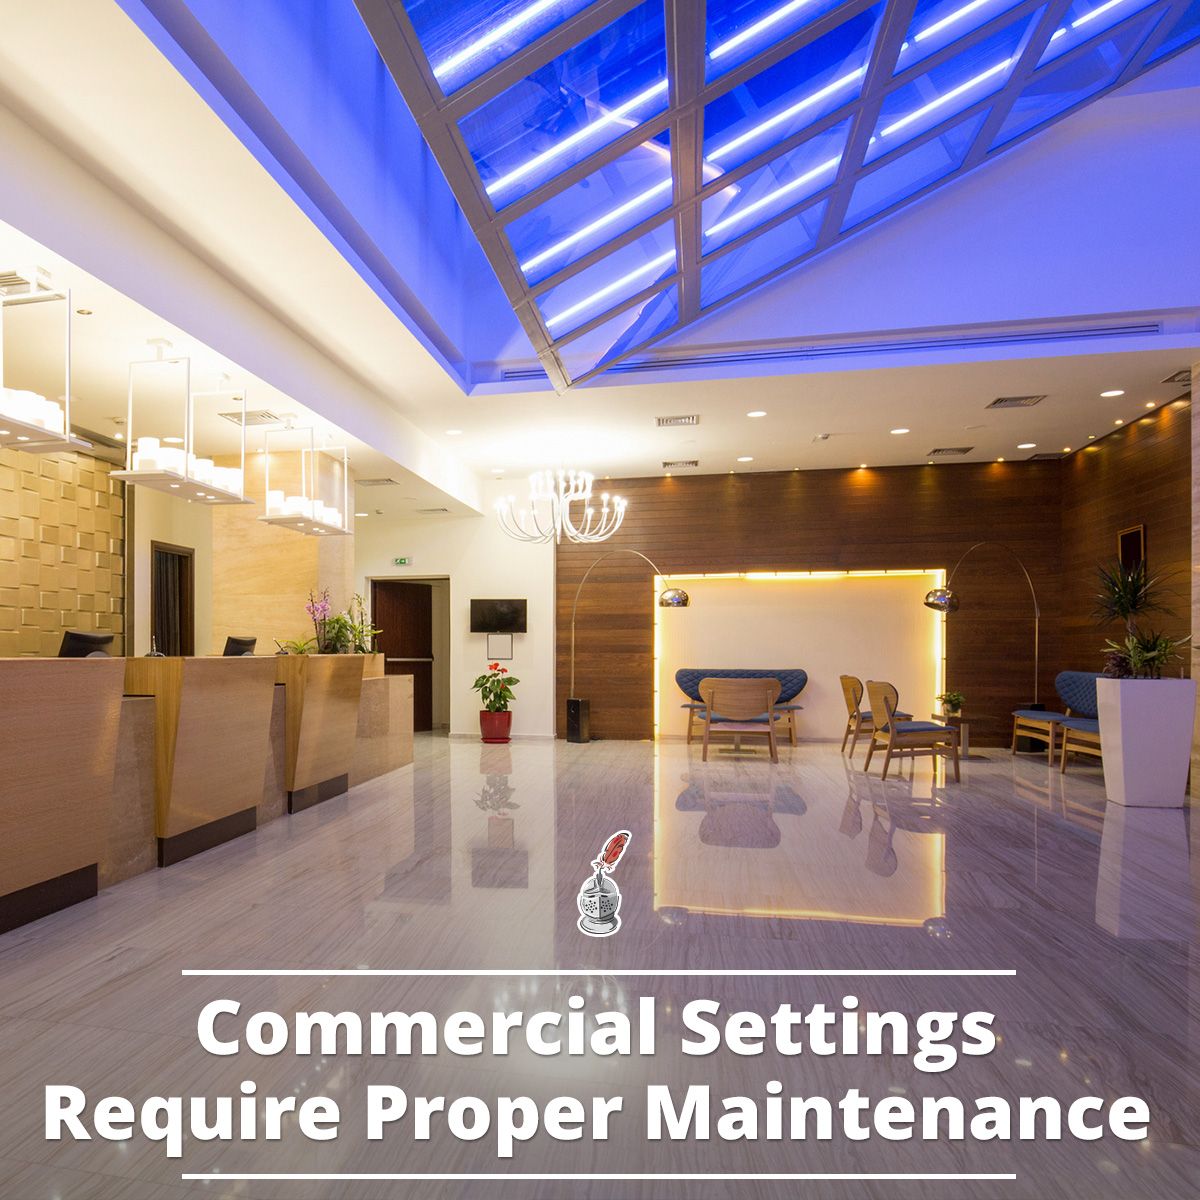 Commercial Settings Require Proper Maintenance